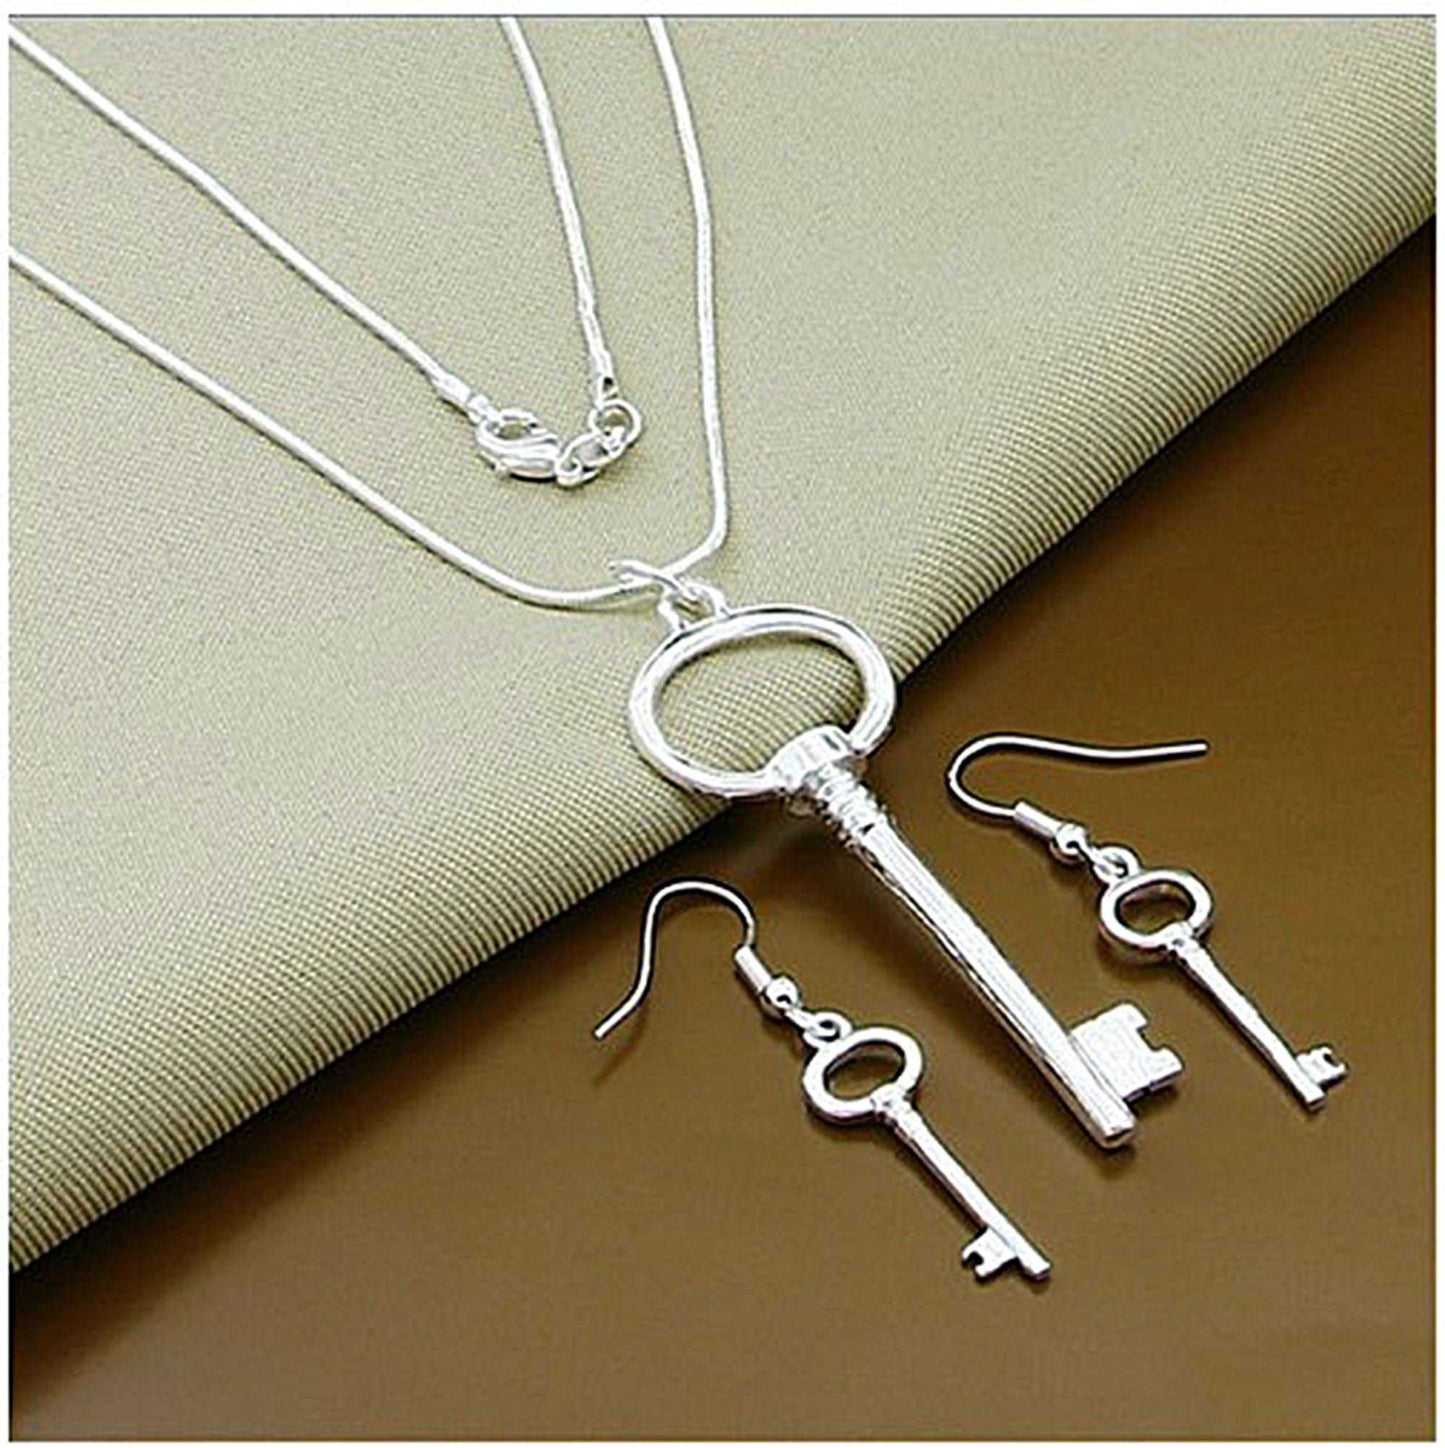 Elegant sterling silver necklace and earring sets - Providence silver gold jewelry usa